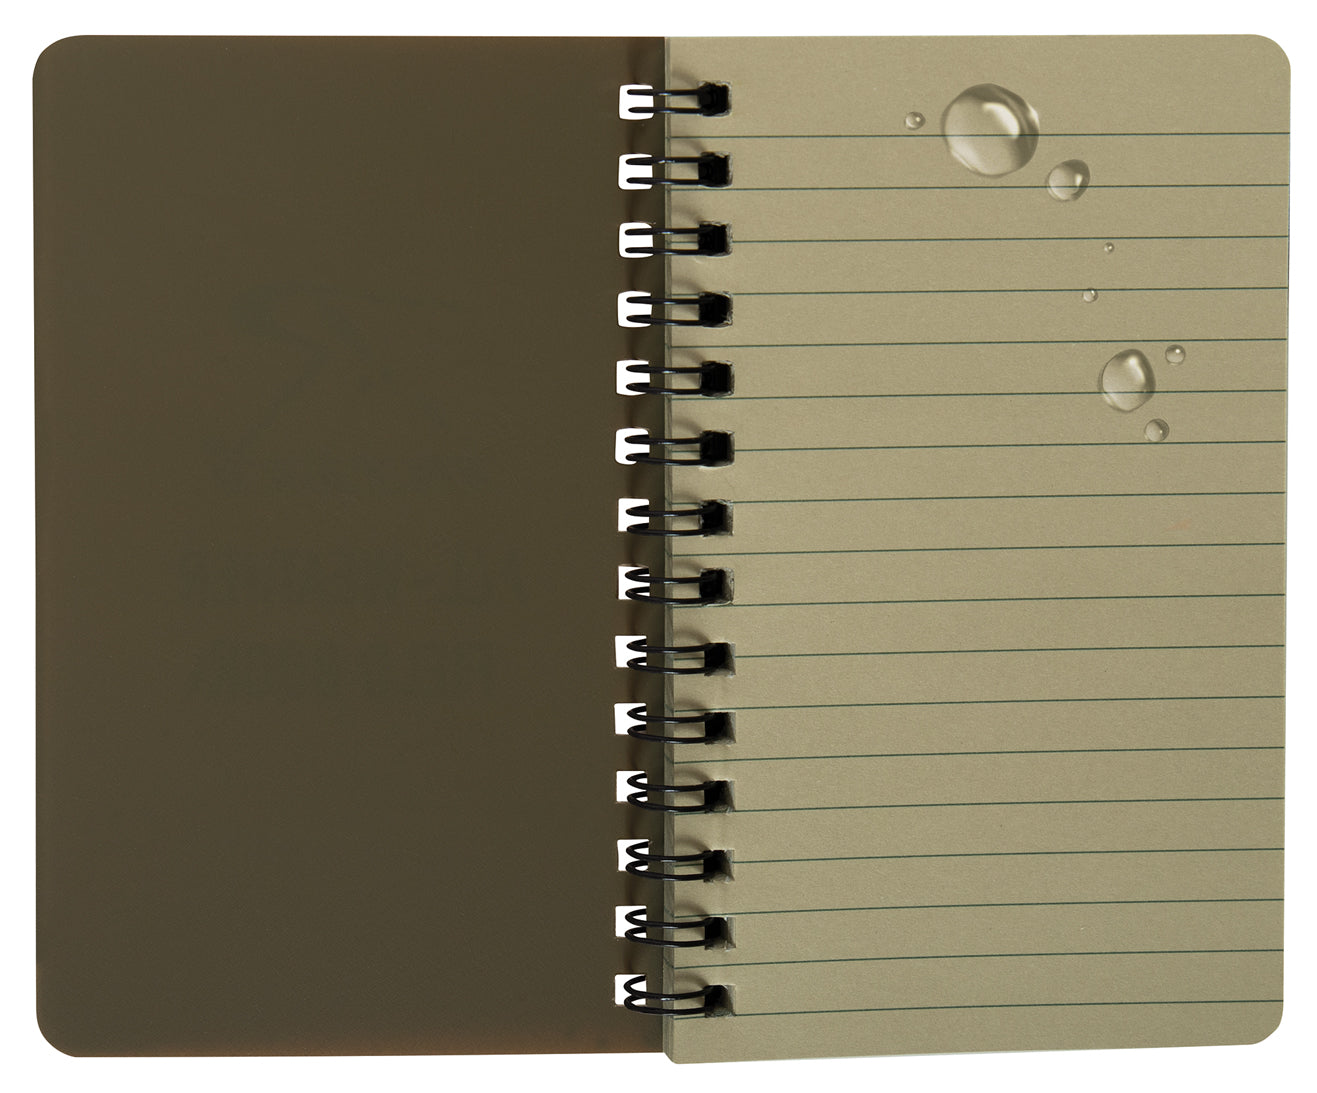 Rothco All-Weather Waterproof Notebook 12.7cm x 8cm